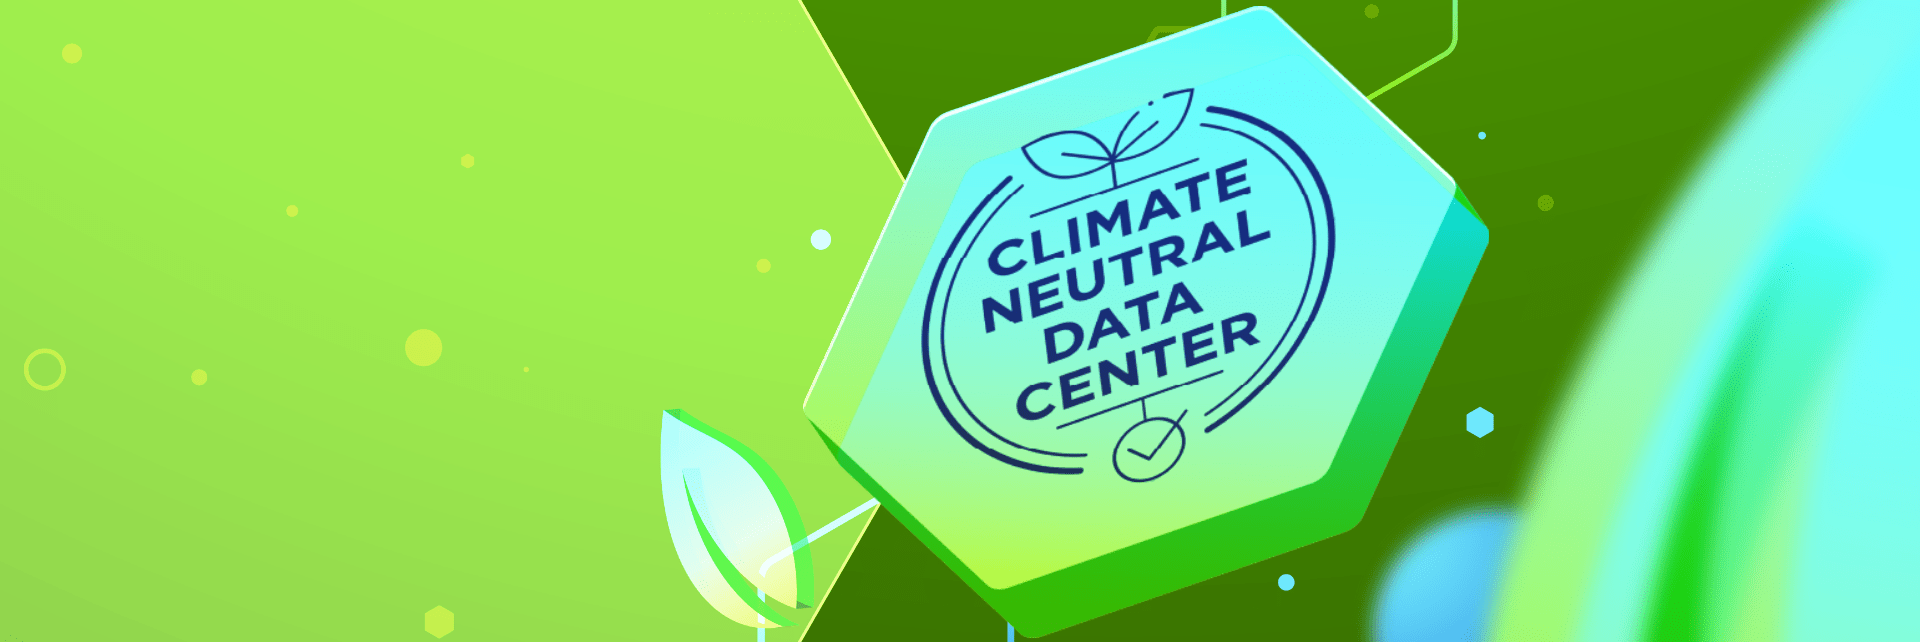 Climate-neutral-homepage-banner.png